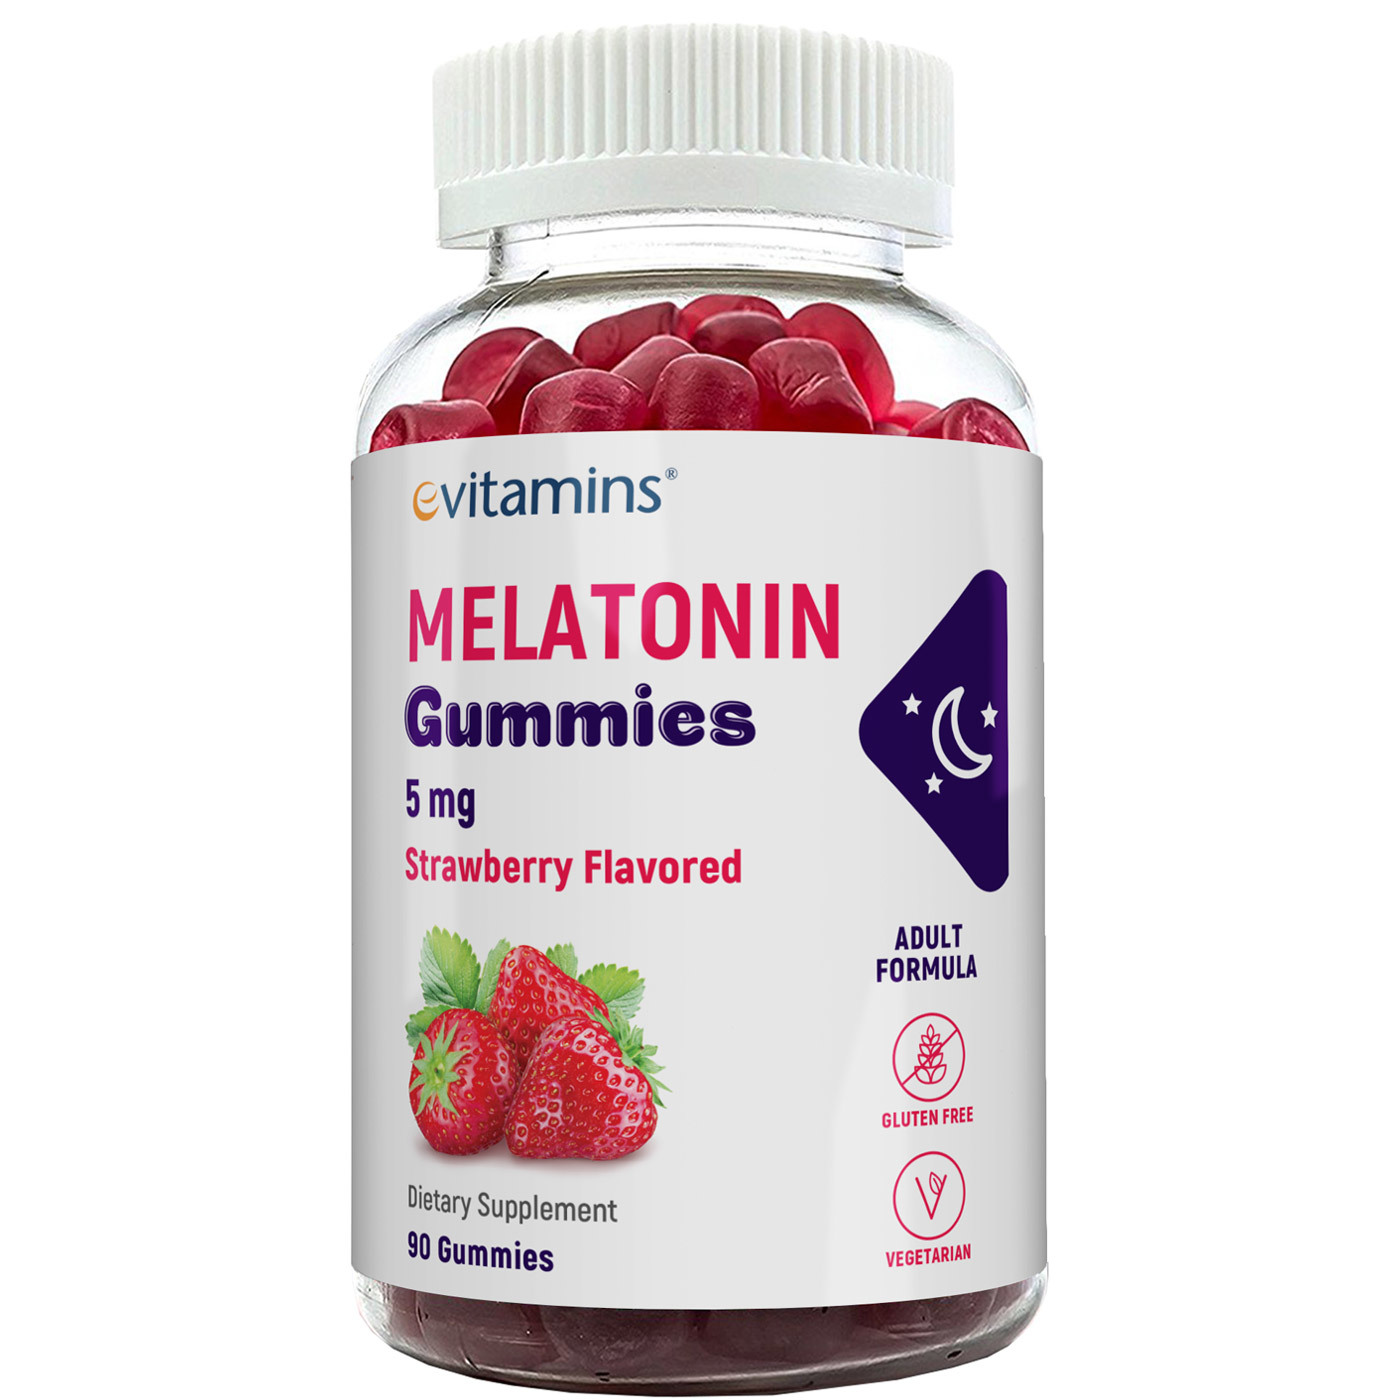 Melatonin Gummies For Dogs - Can i give...